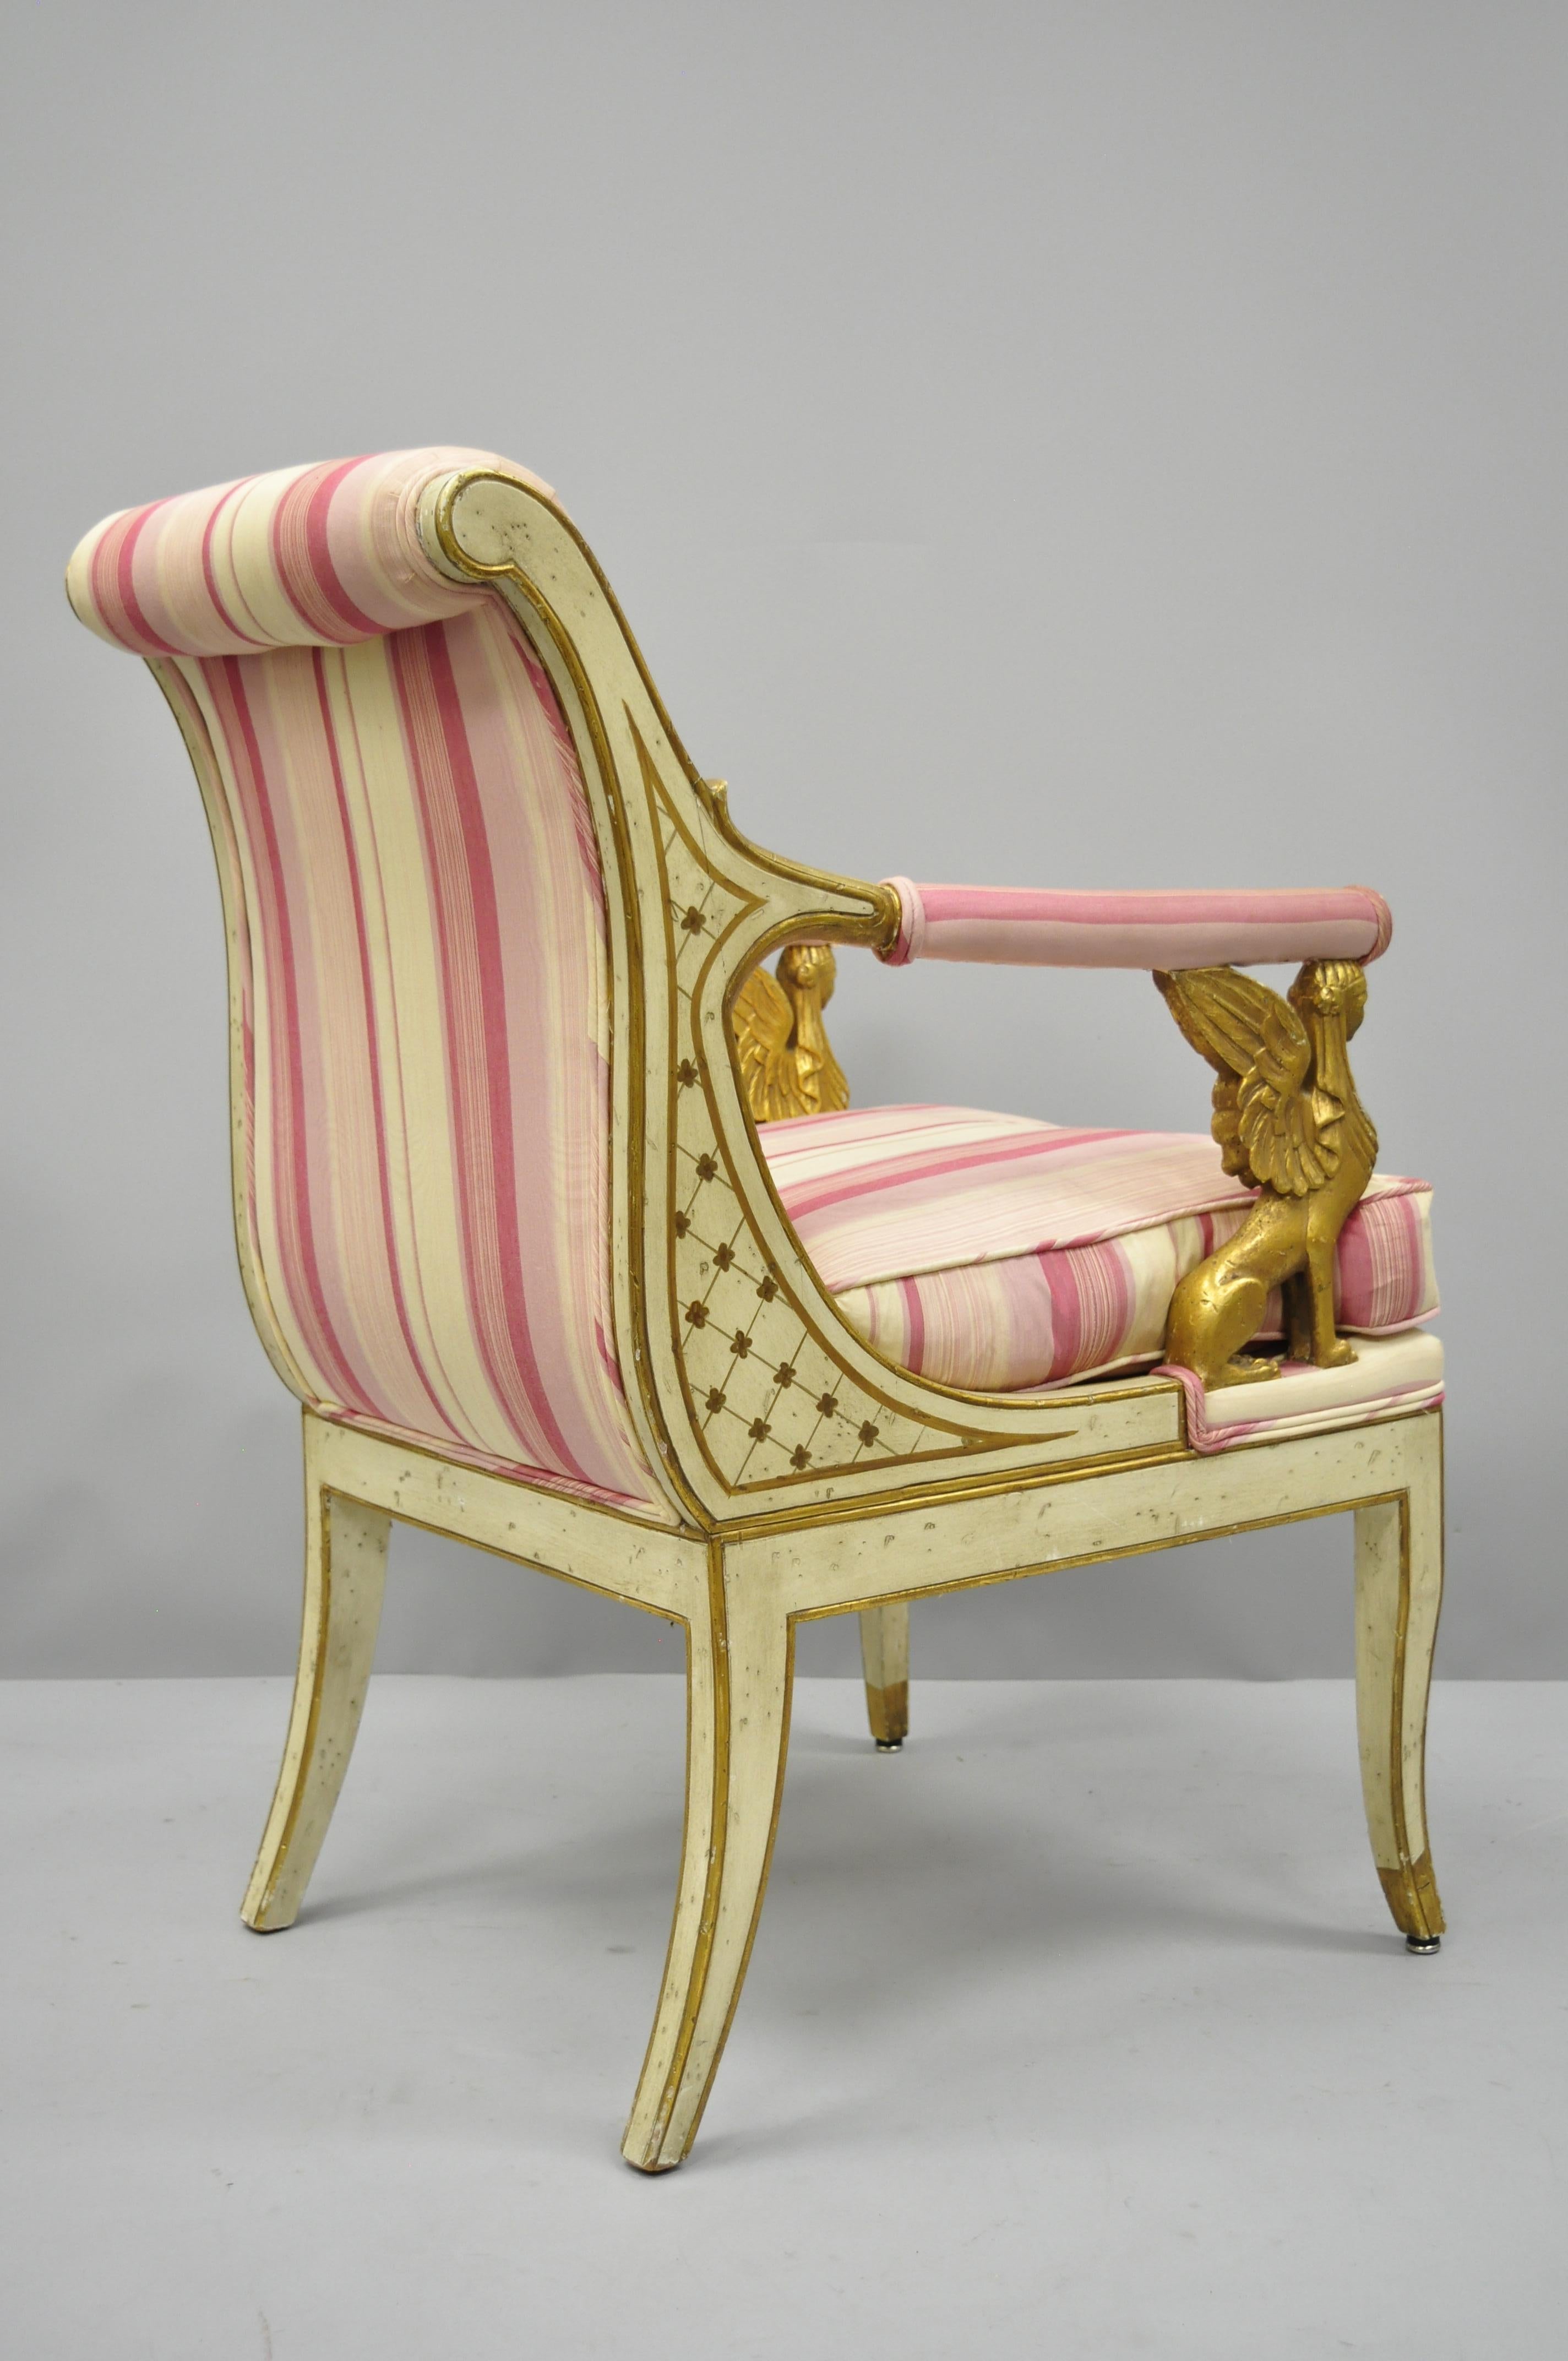 Italian neoclassical cream and gold parcel gilt armchair with winged maiden griffins. Item features carved and parcel gilt figural winged female griffins, rolled back, solid wood frame, upholstered seat, distressed finish, shapely saber legs, and